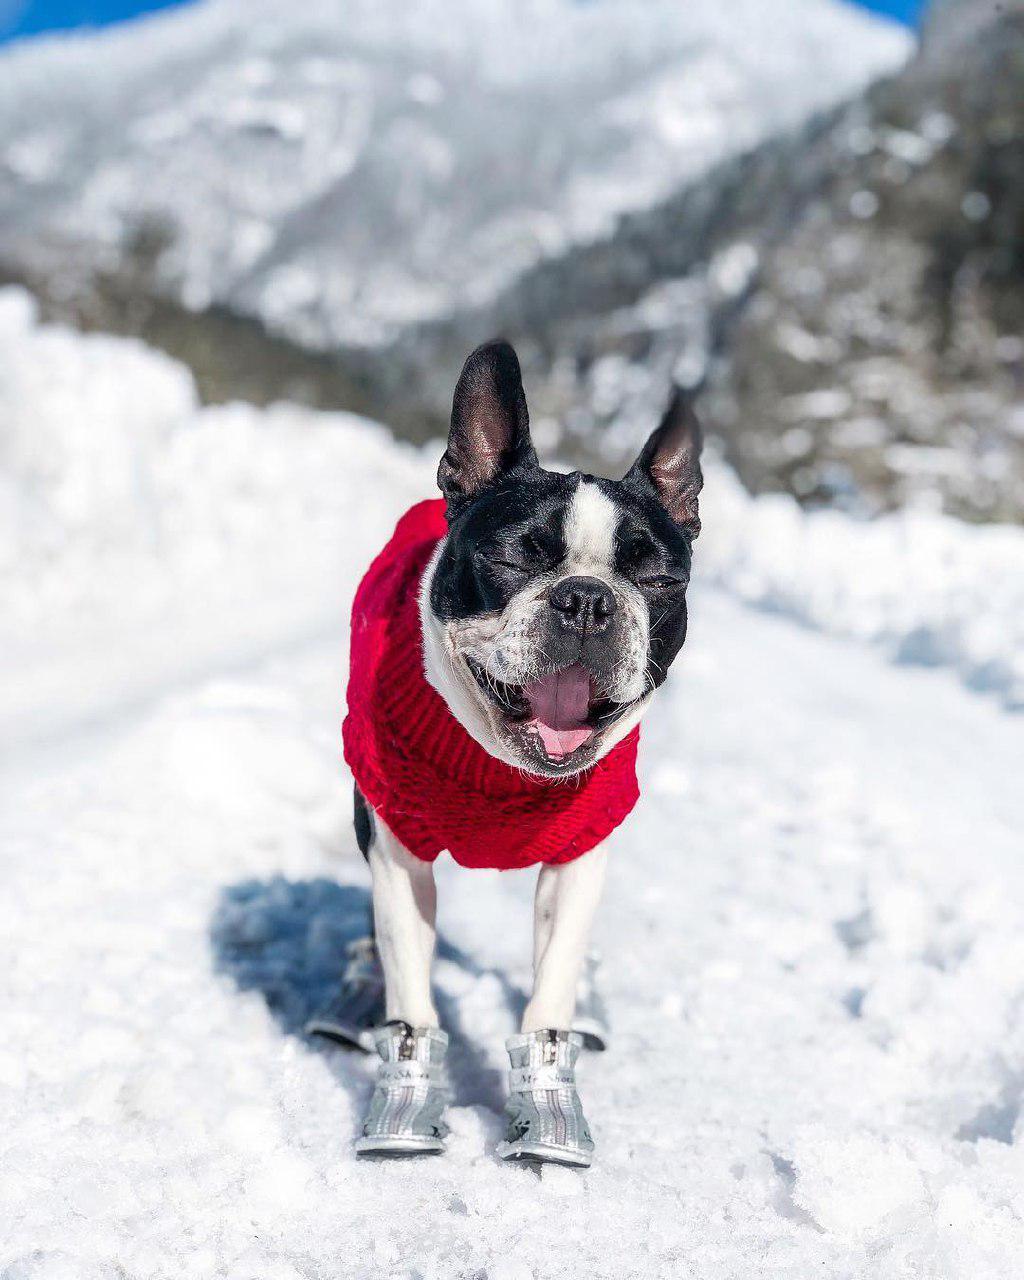 A Boston Terrier wearing a red sweater while standing in snow and yawning